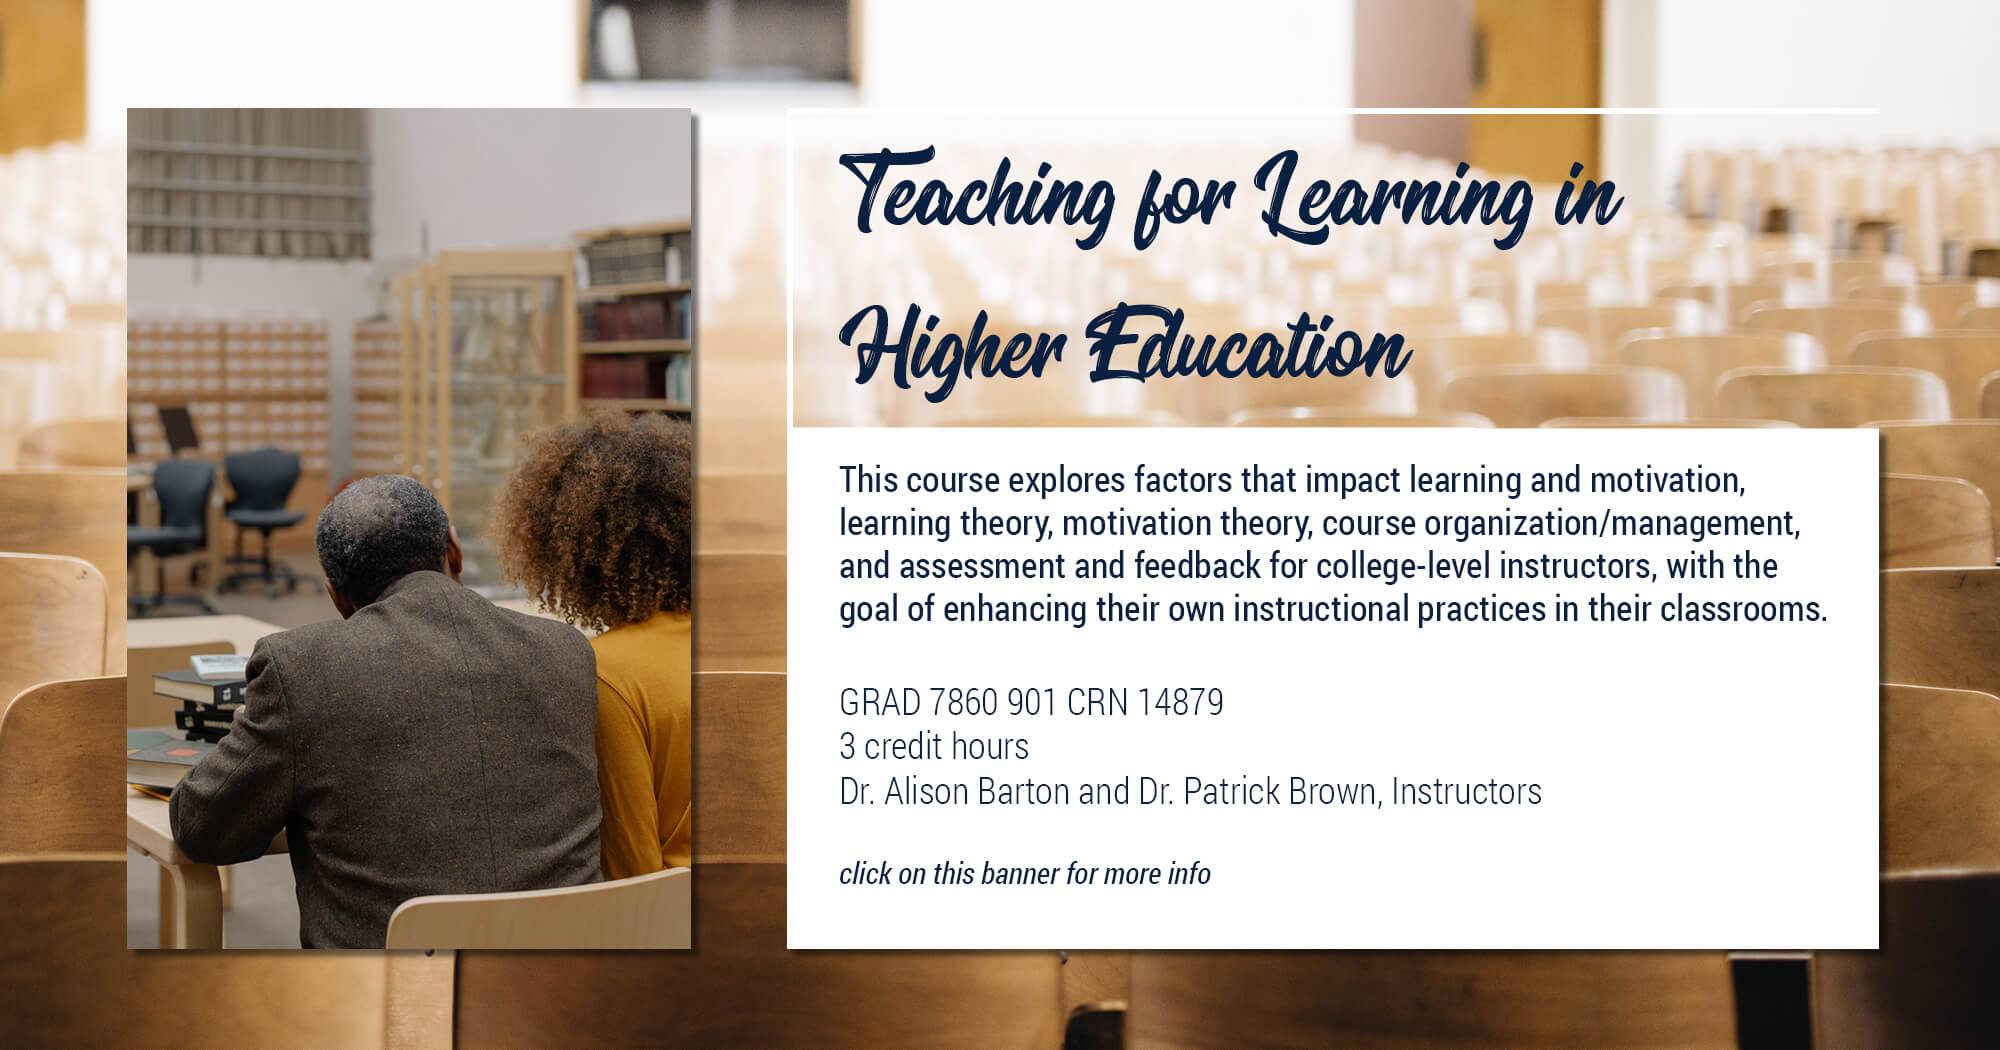 Teaching for Learning in Higher Education